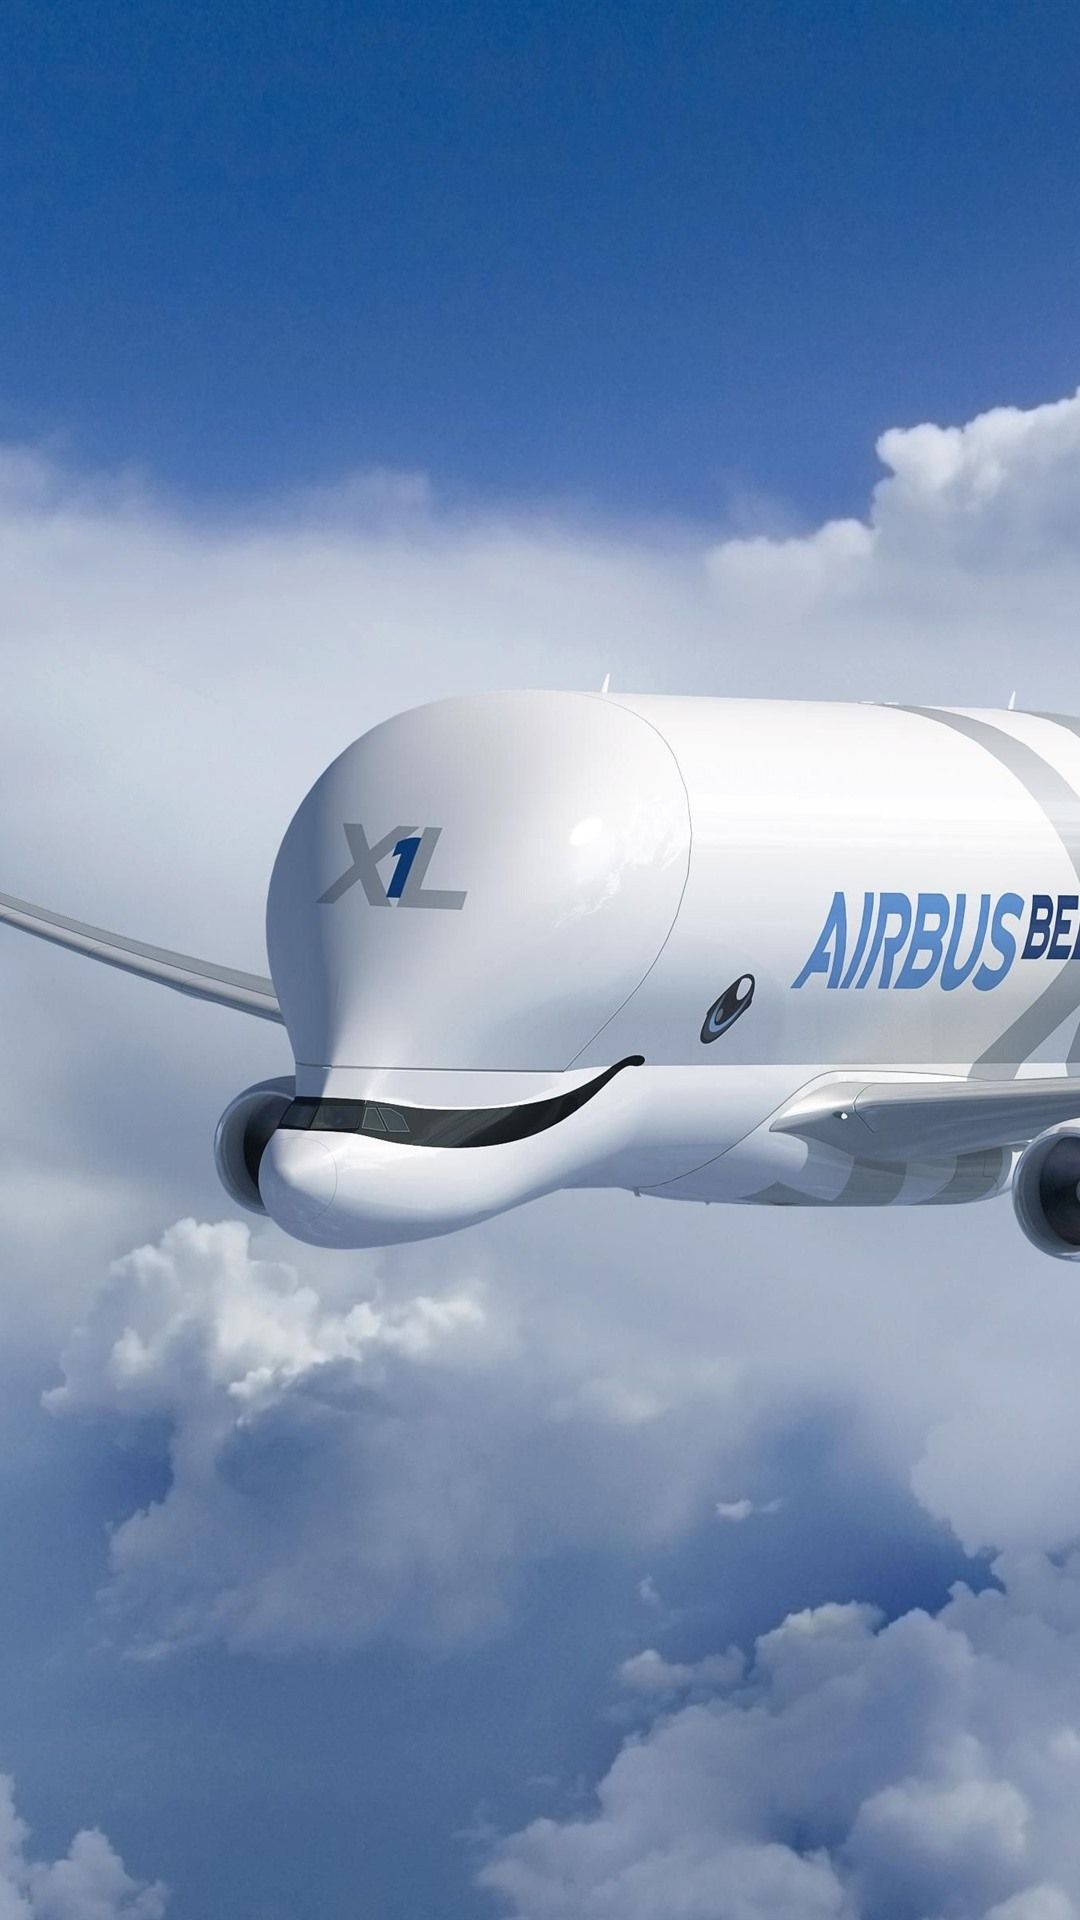 Airbus Beluga, Unique aircraft, Wallpapers collection, 1080x1920 Full HD Handy